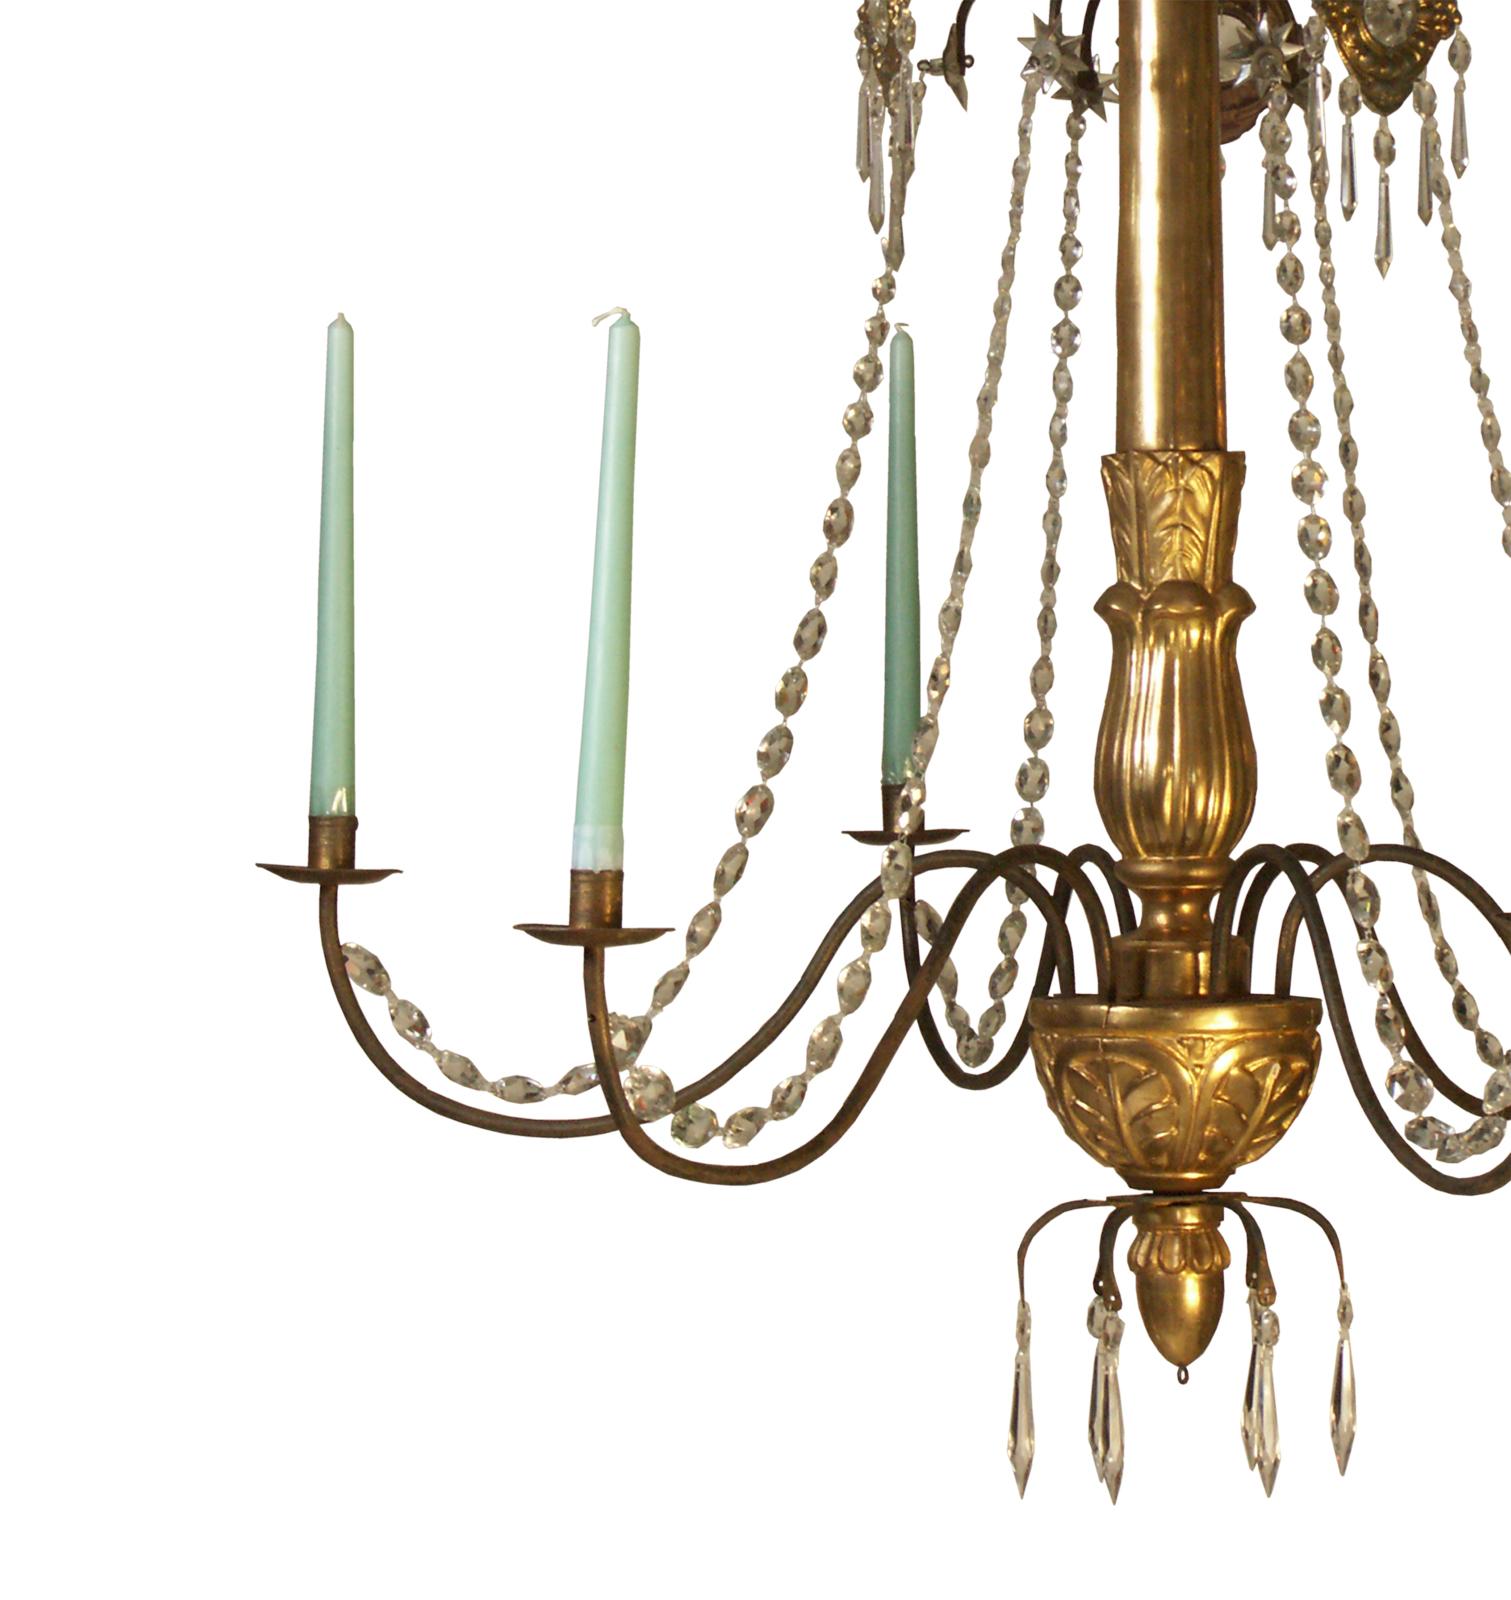 Brass Original Biedermeier Chandelier 19th Century '1850' Carved and Gilded Six Flames For Sale